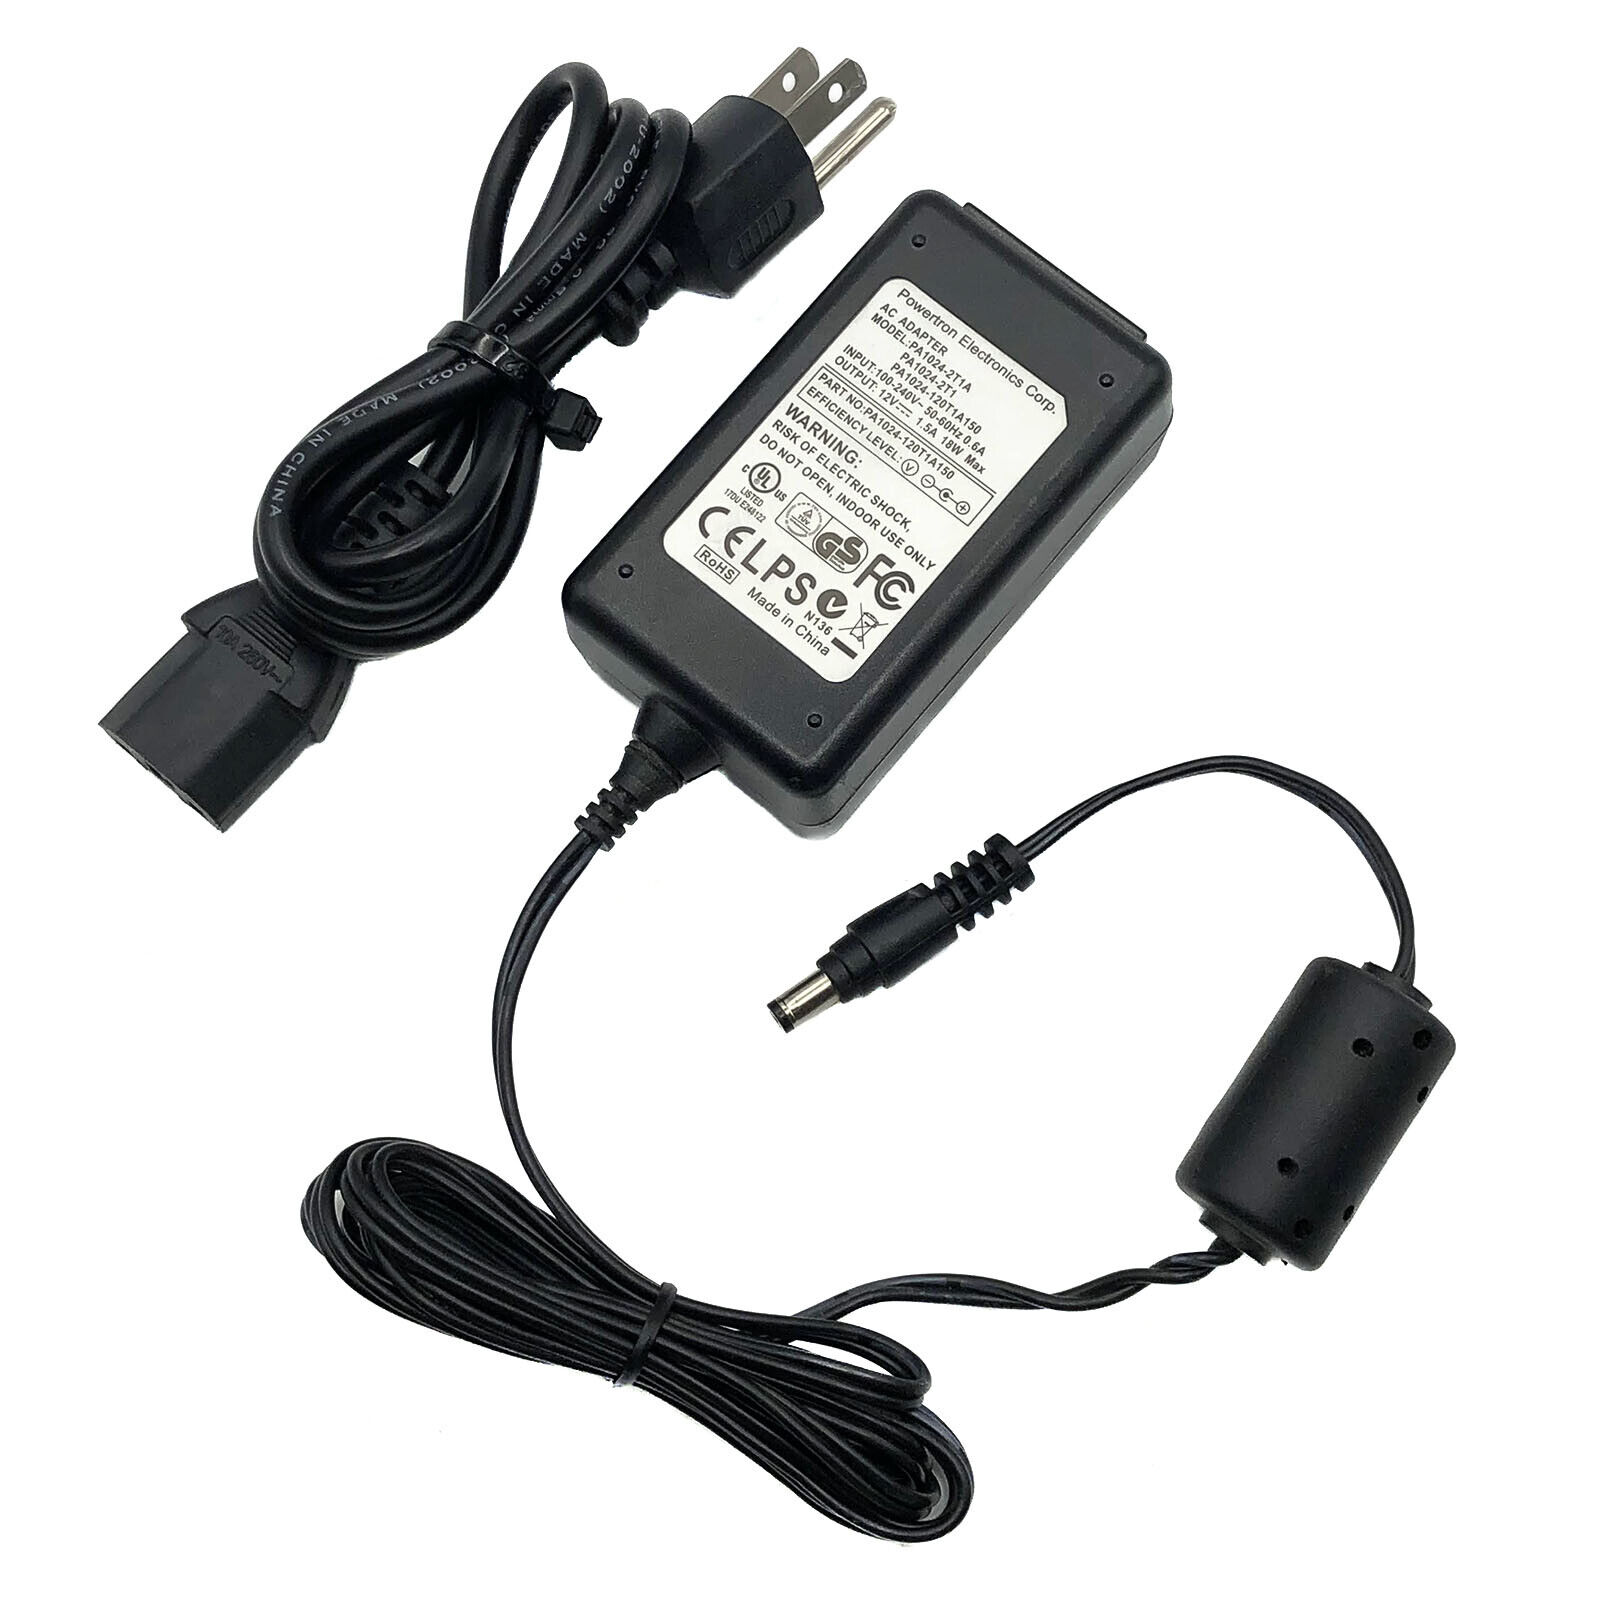 *Brand NEW*Powertron 12V 1.5A 18W AC Adapter PA1024-2T1A PA1024-2T1 PA1024-120T1A150 for Casio WK-65 - Click Image to Close